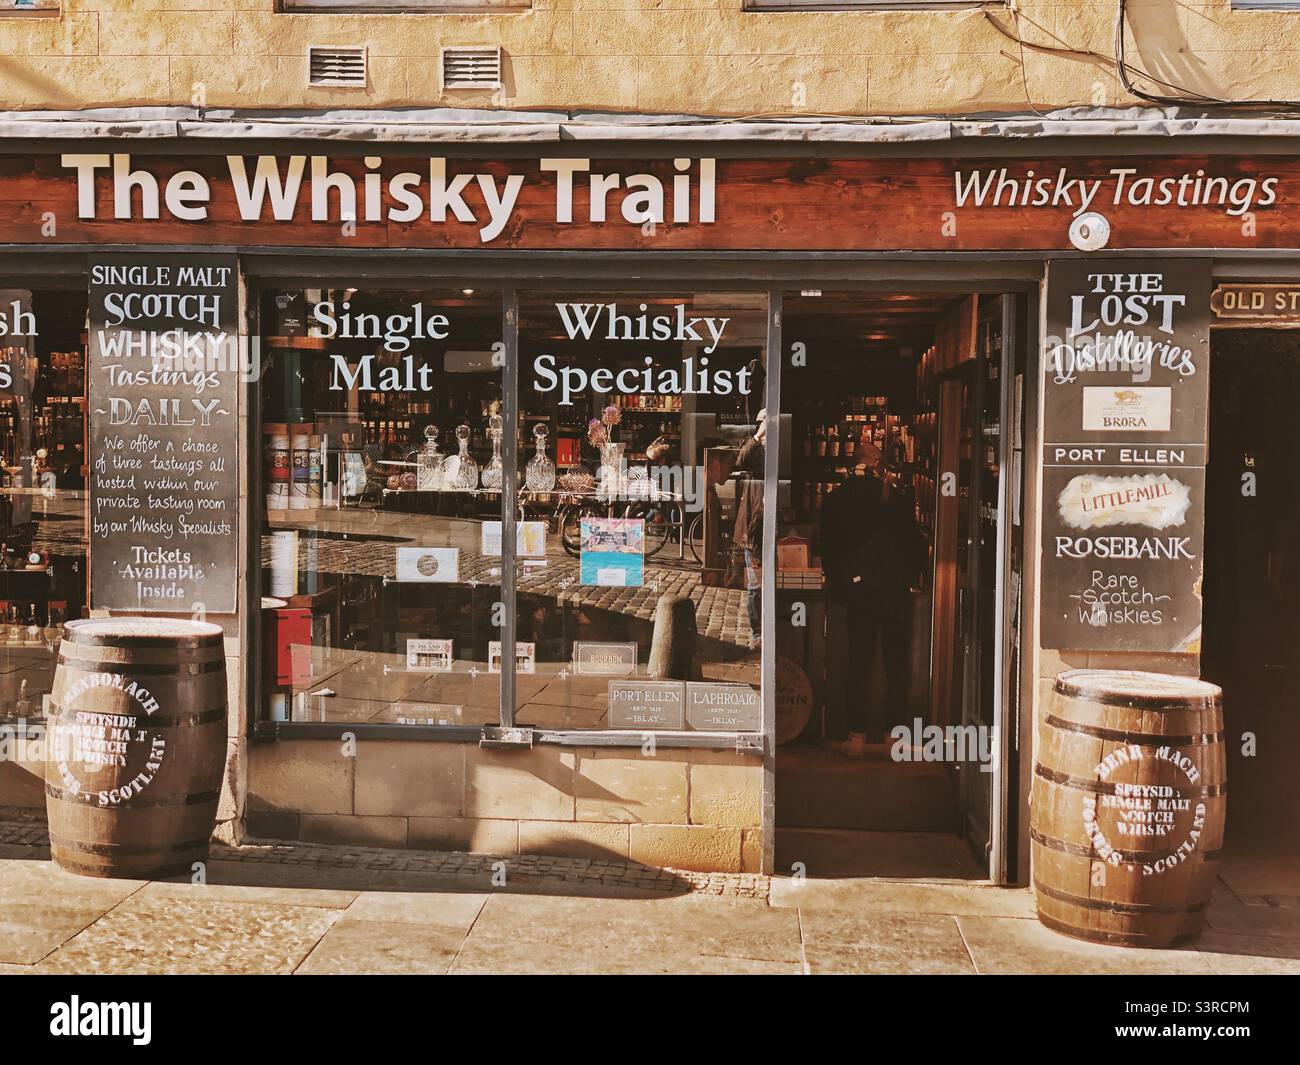 The Whisky Trail, Royal Mile, Edinburgh, Scotland. Bottle shop offering popular and hard to find Scottish Whisky brands, plus beer, wine and glassware. Stock Photo